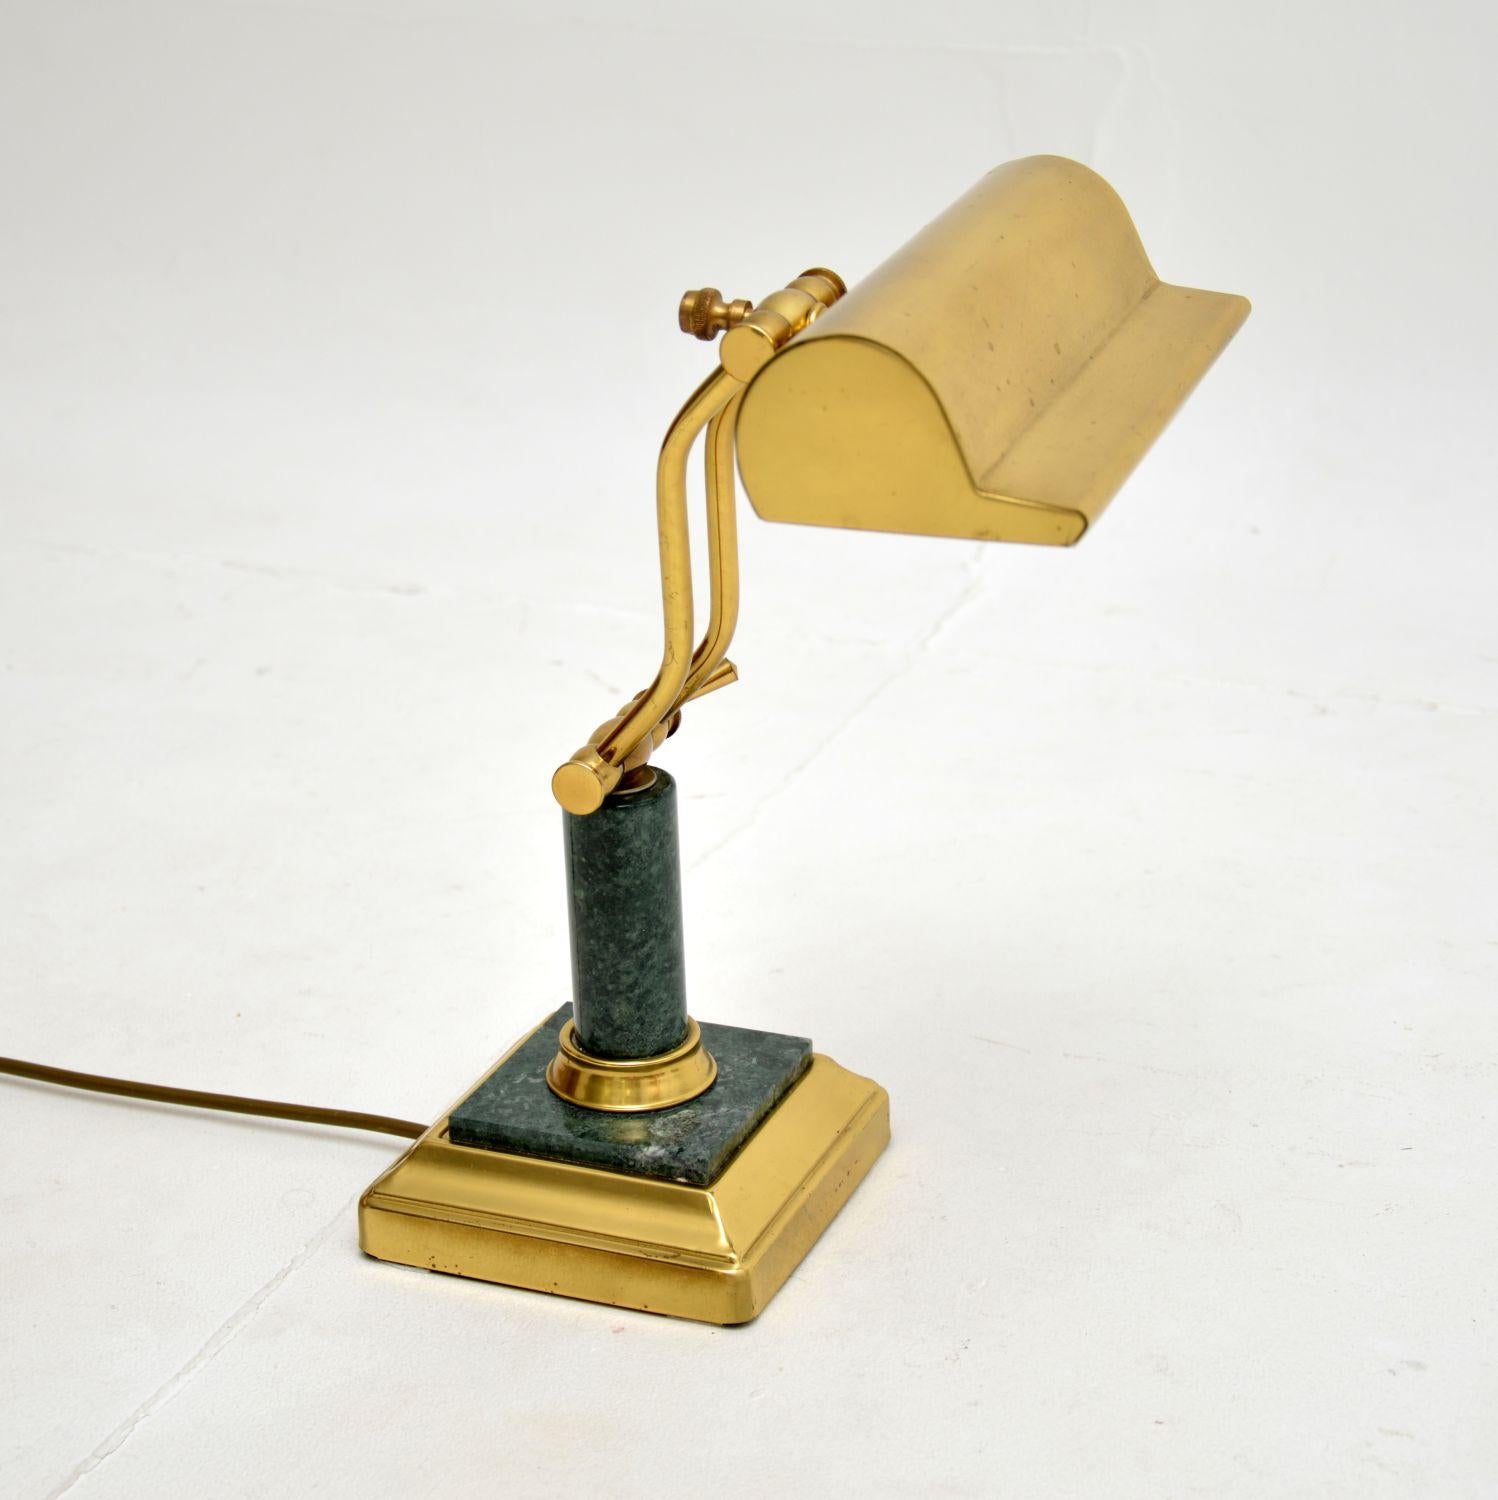 A fantastic vintage French art deco desk lamp in brass and marble, dating from around the 1950’s.

It is of superb quality, the solid brass frame is beautifully offset by the green marble. It has a nicely shaped shade which can be tilted to adjust